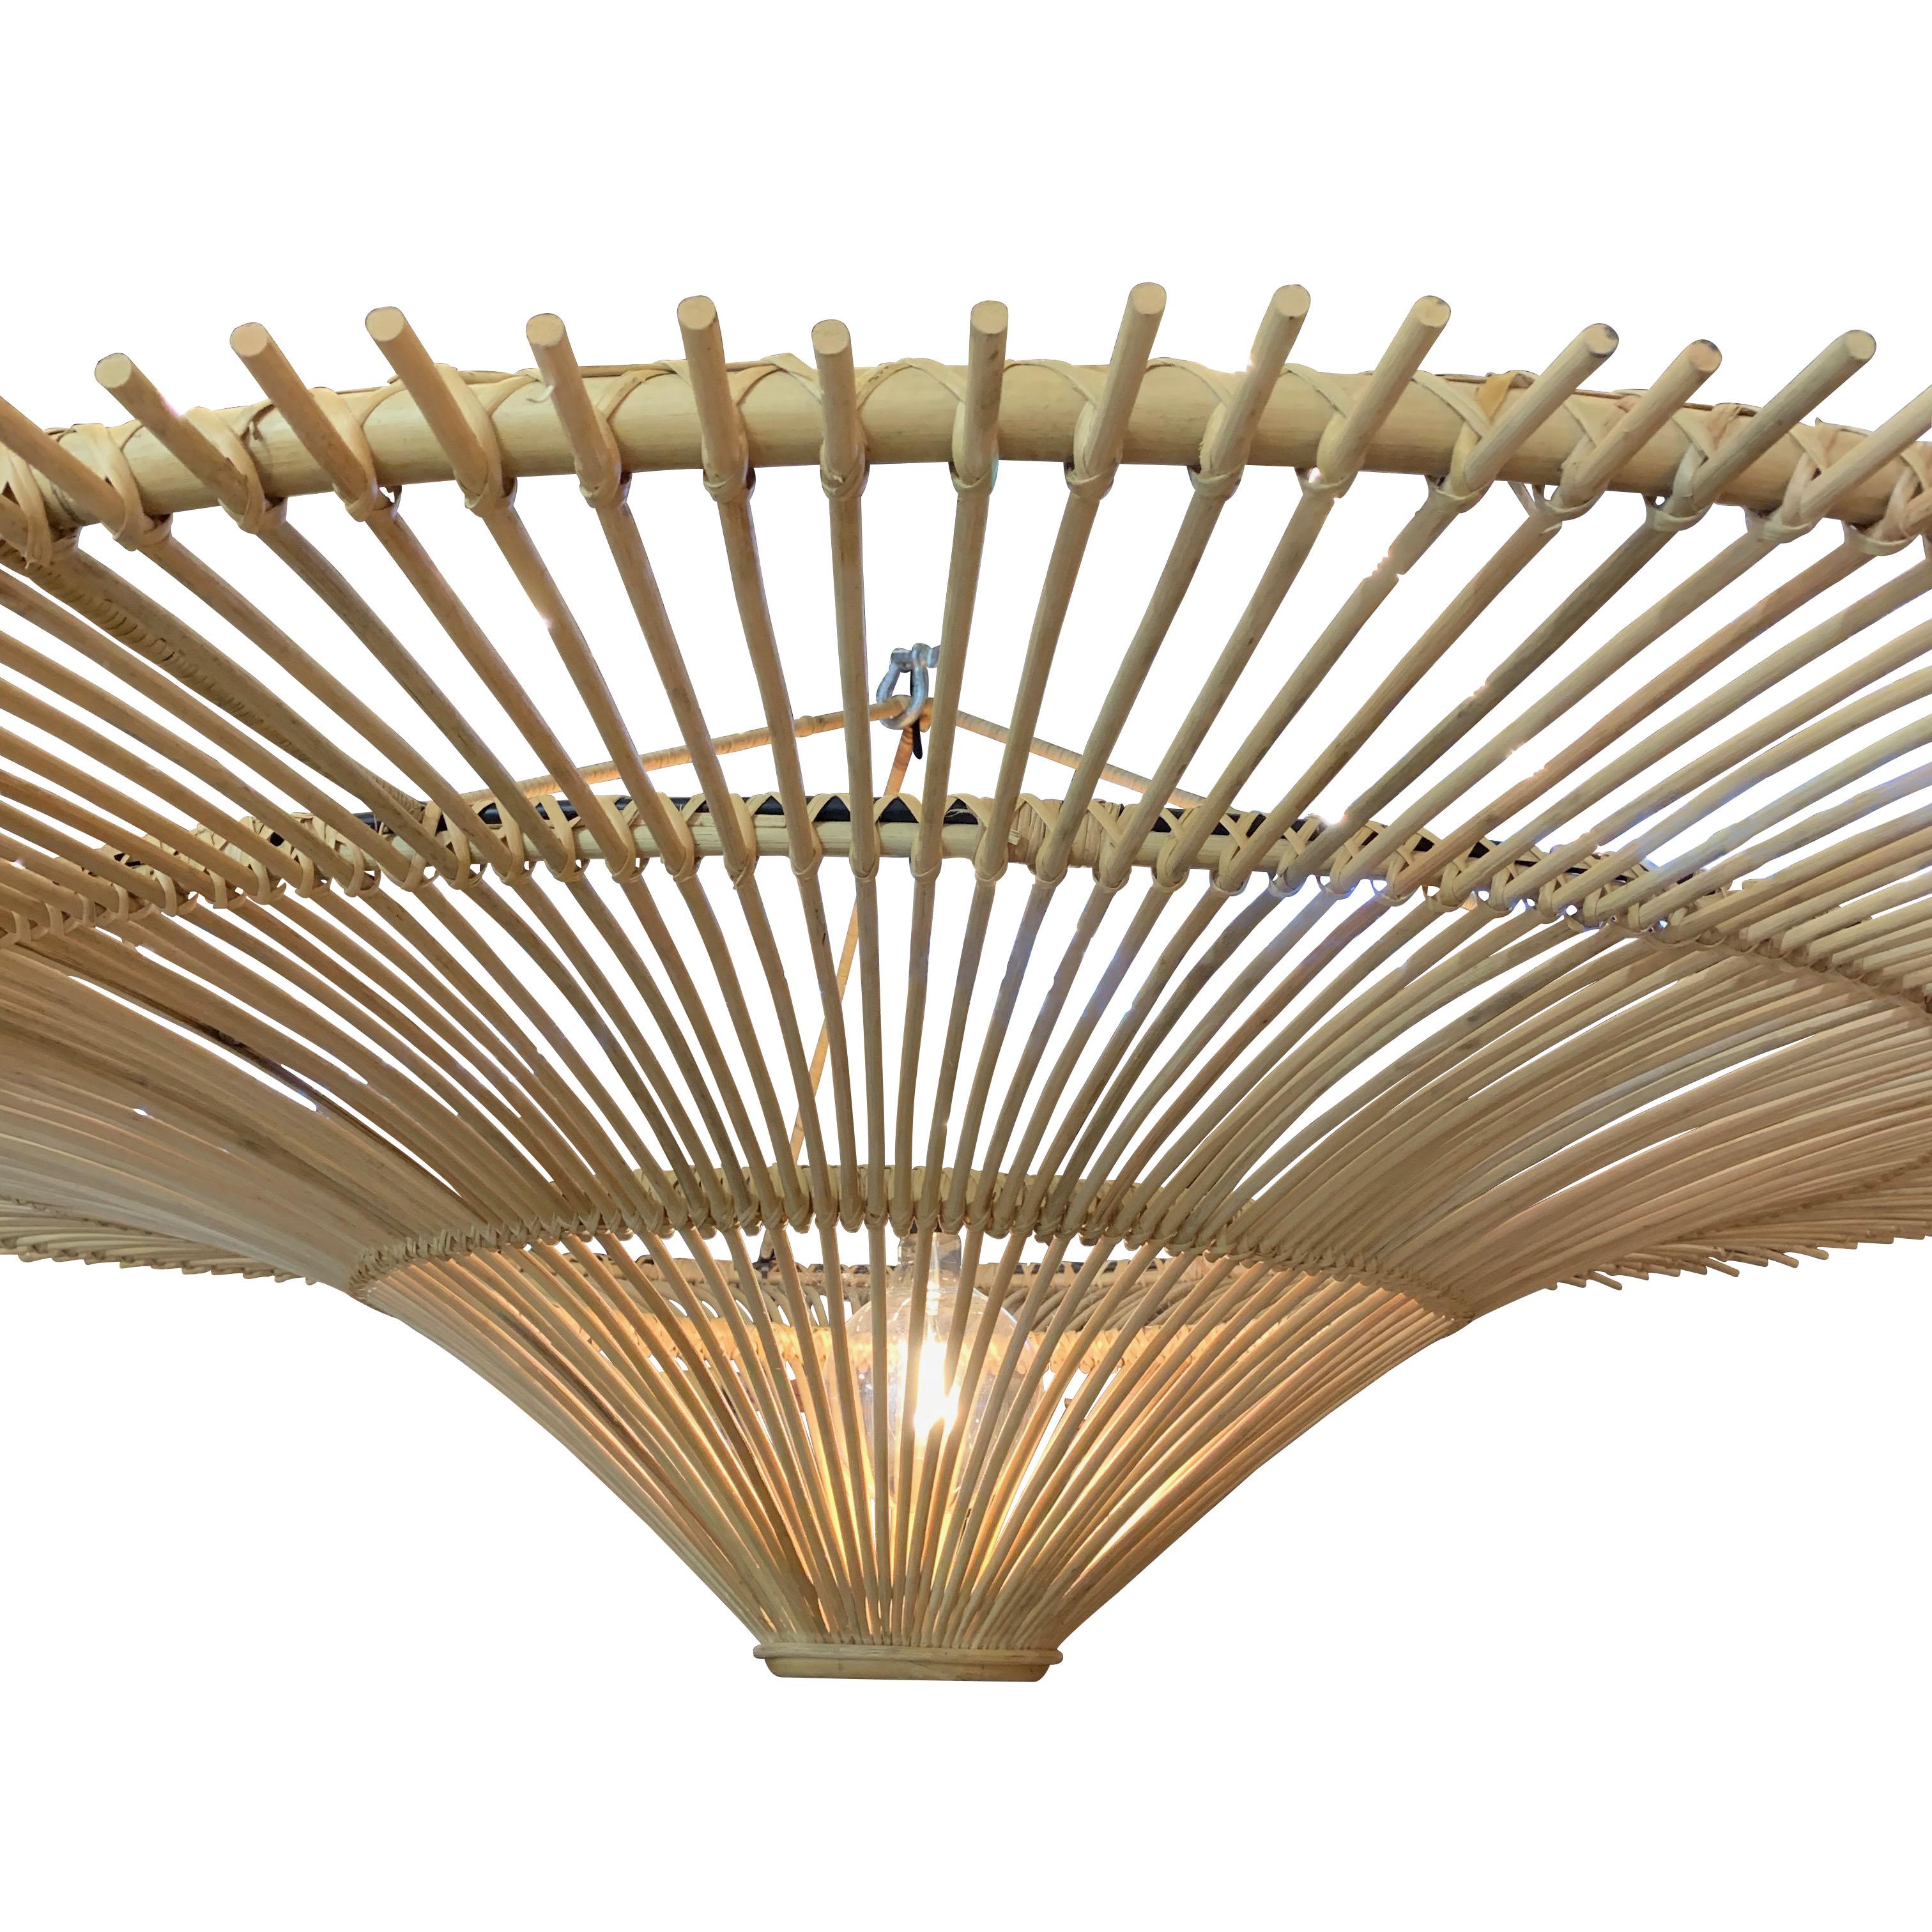 Contemporary Indonesian extra large round umbrella shaped chandelier made of bamboo
Single bulb
60 watt to 300 watt maximum
Also available in two additional sizes
L976 32